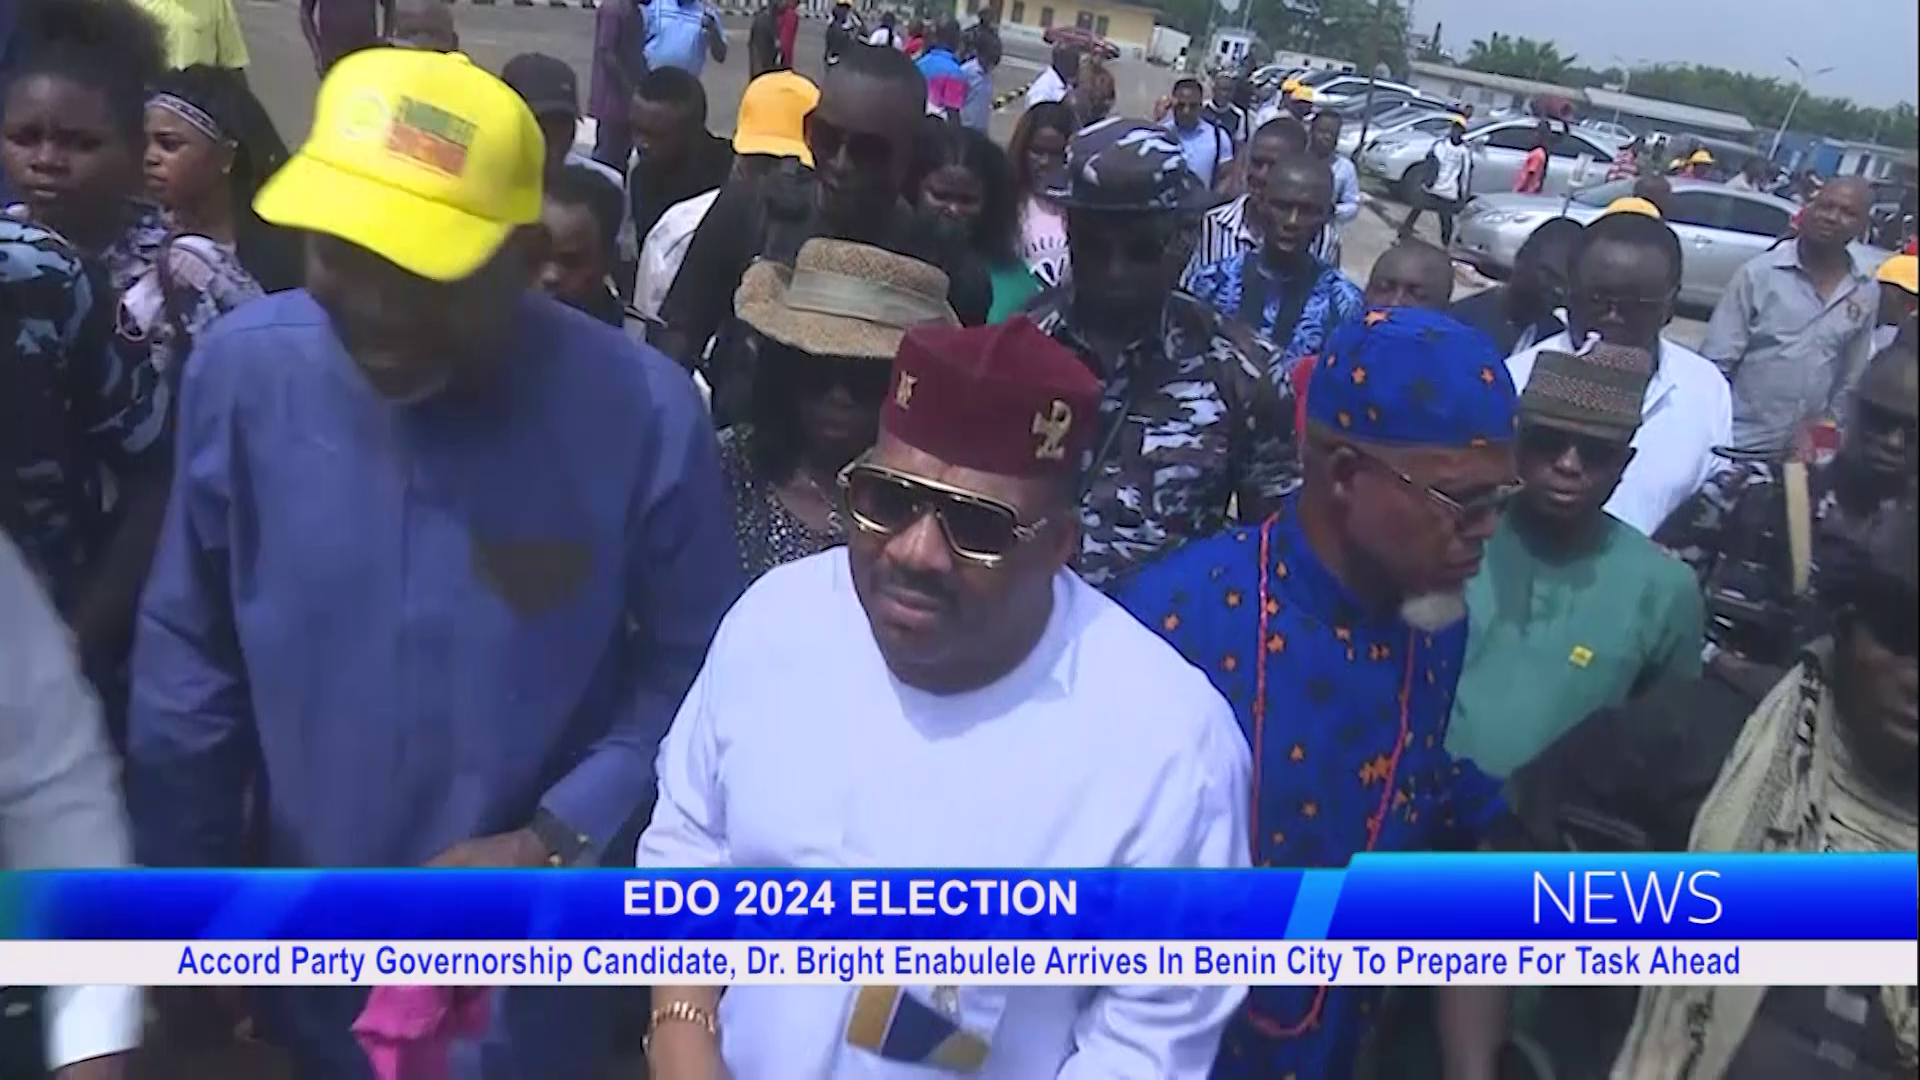 Accord Party Governorship Candidate, Dr. Bright Enabulele Arrives In Benin City To Prepare For Task Ahead